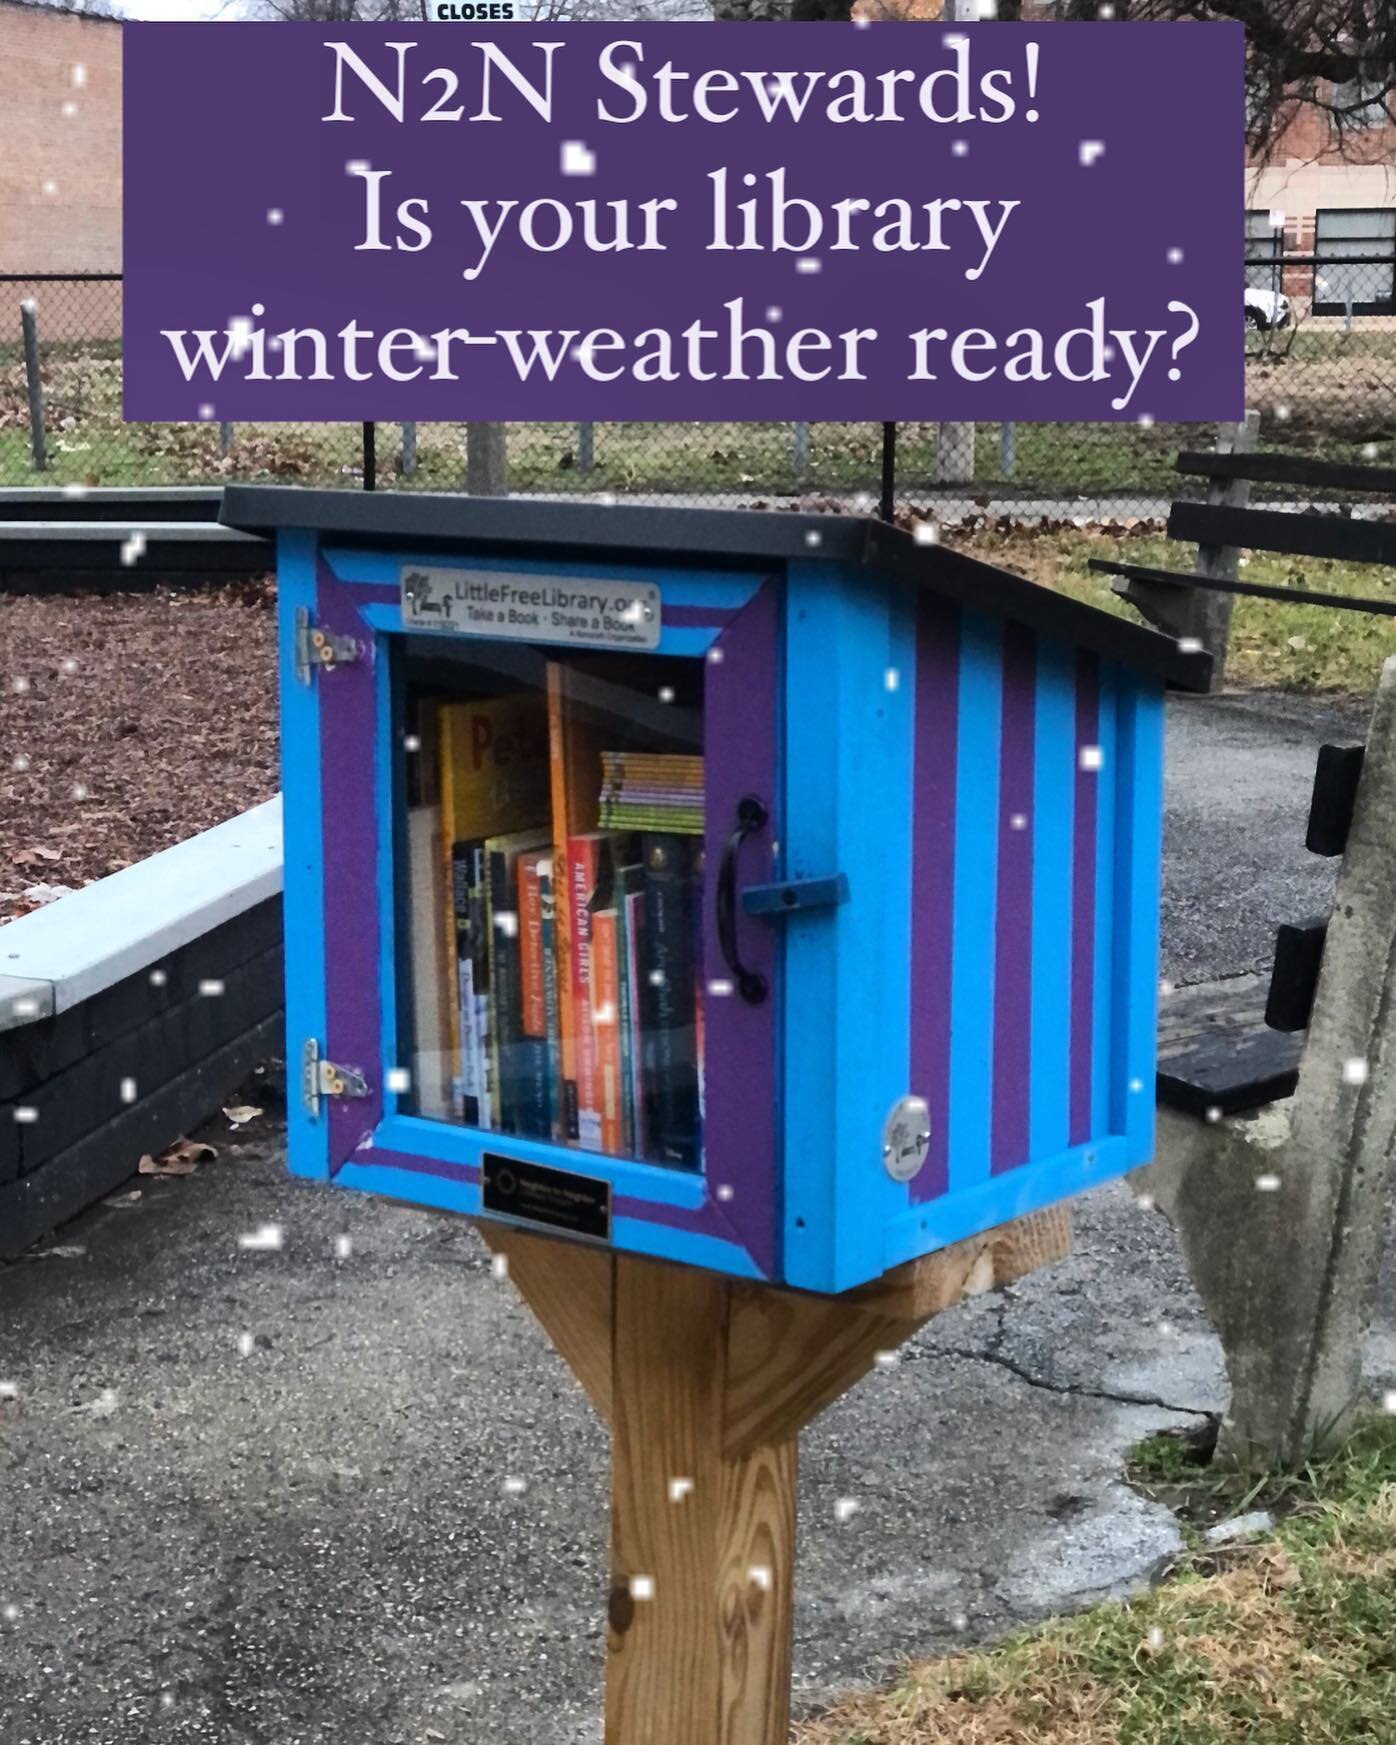 Neighbor to Neighbor Literacy Project Stewards, is your library ready for the Chicago winter? This LFL at Honeysuckle Park in Bronzeville is, thanks to some new plexiglass!
 
Make sure to check your roofs, doors, and plexiglass to make sure no snow c